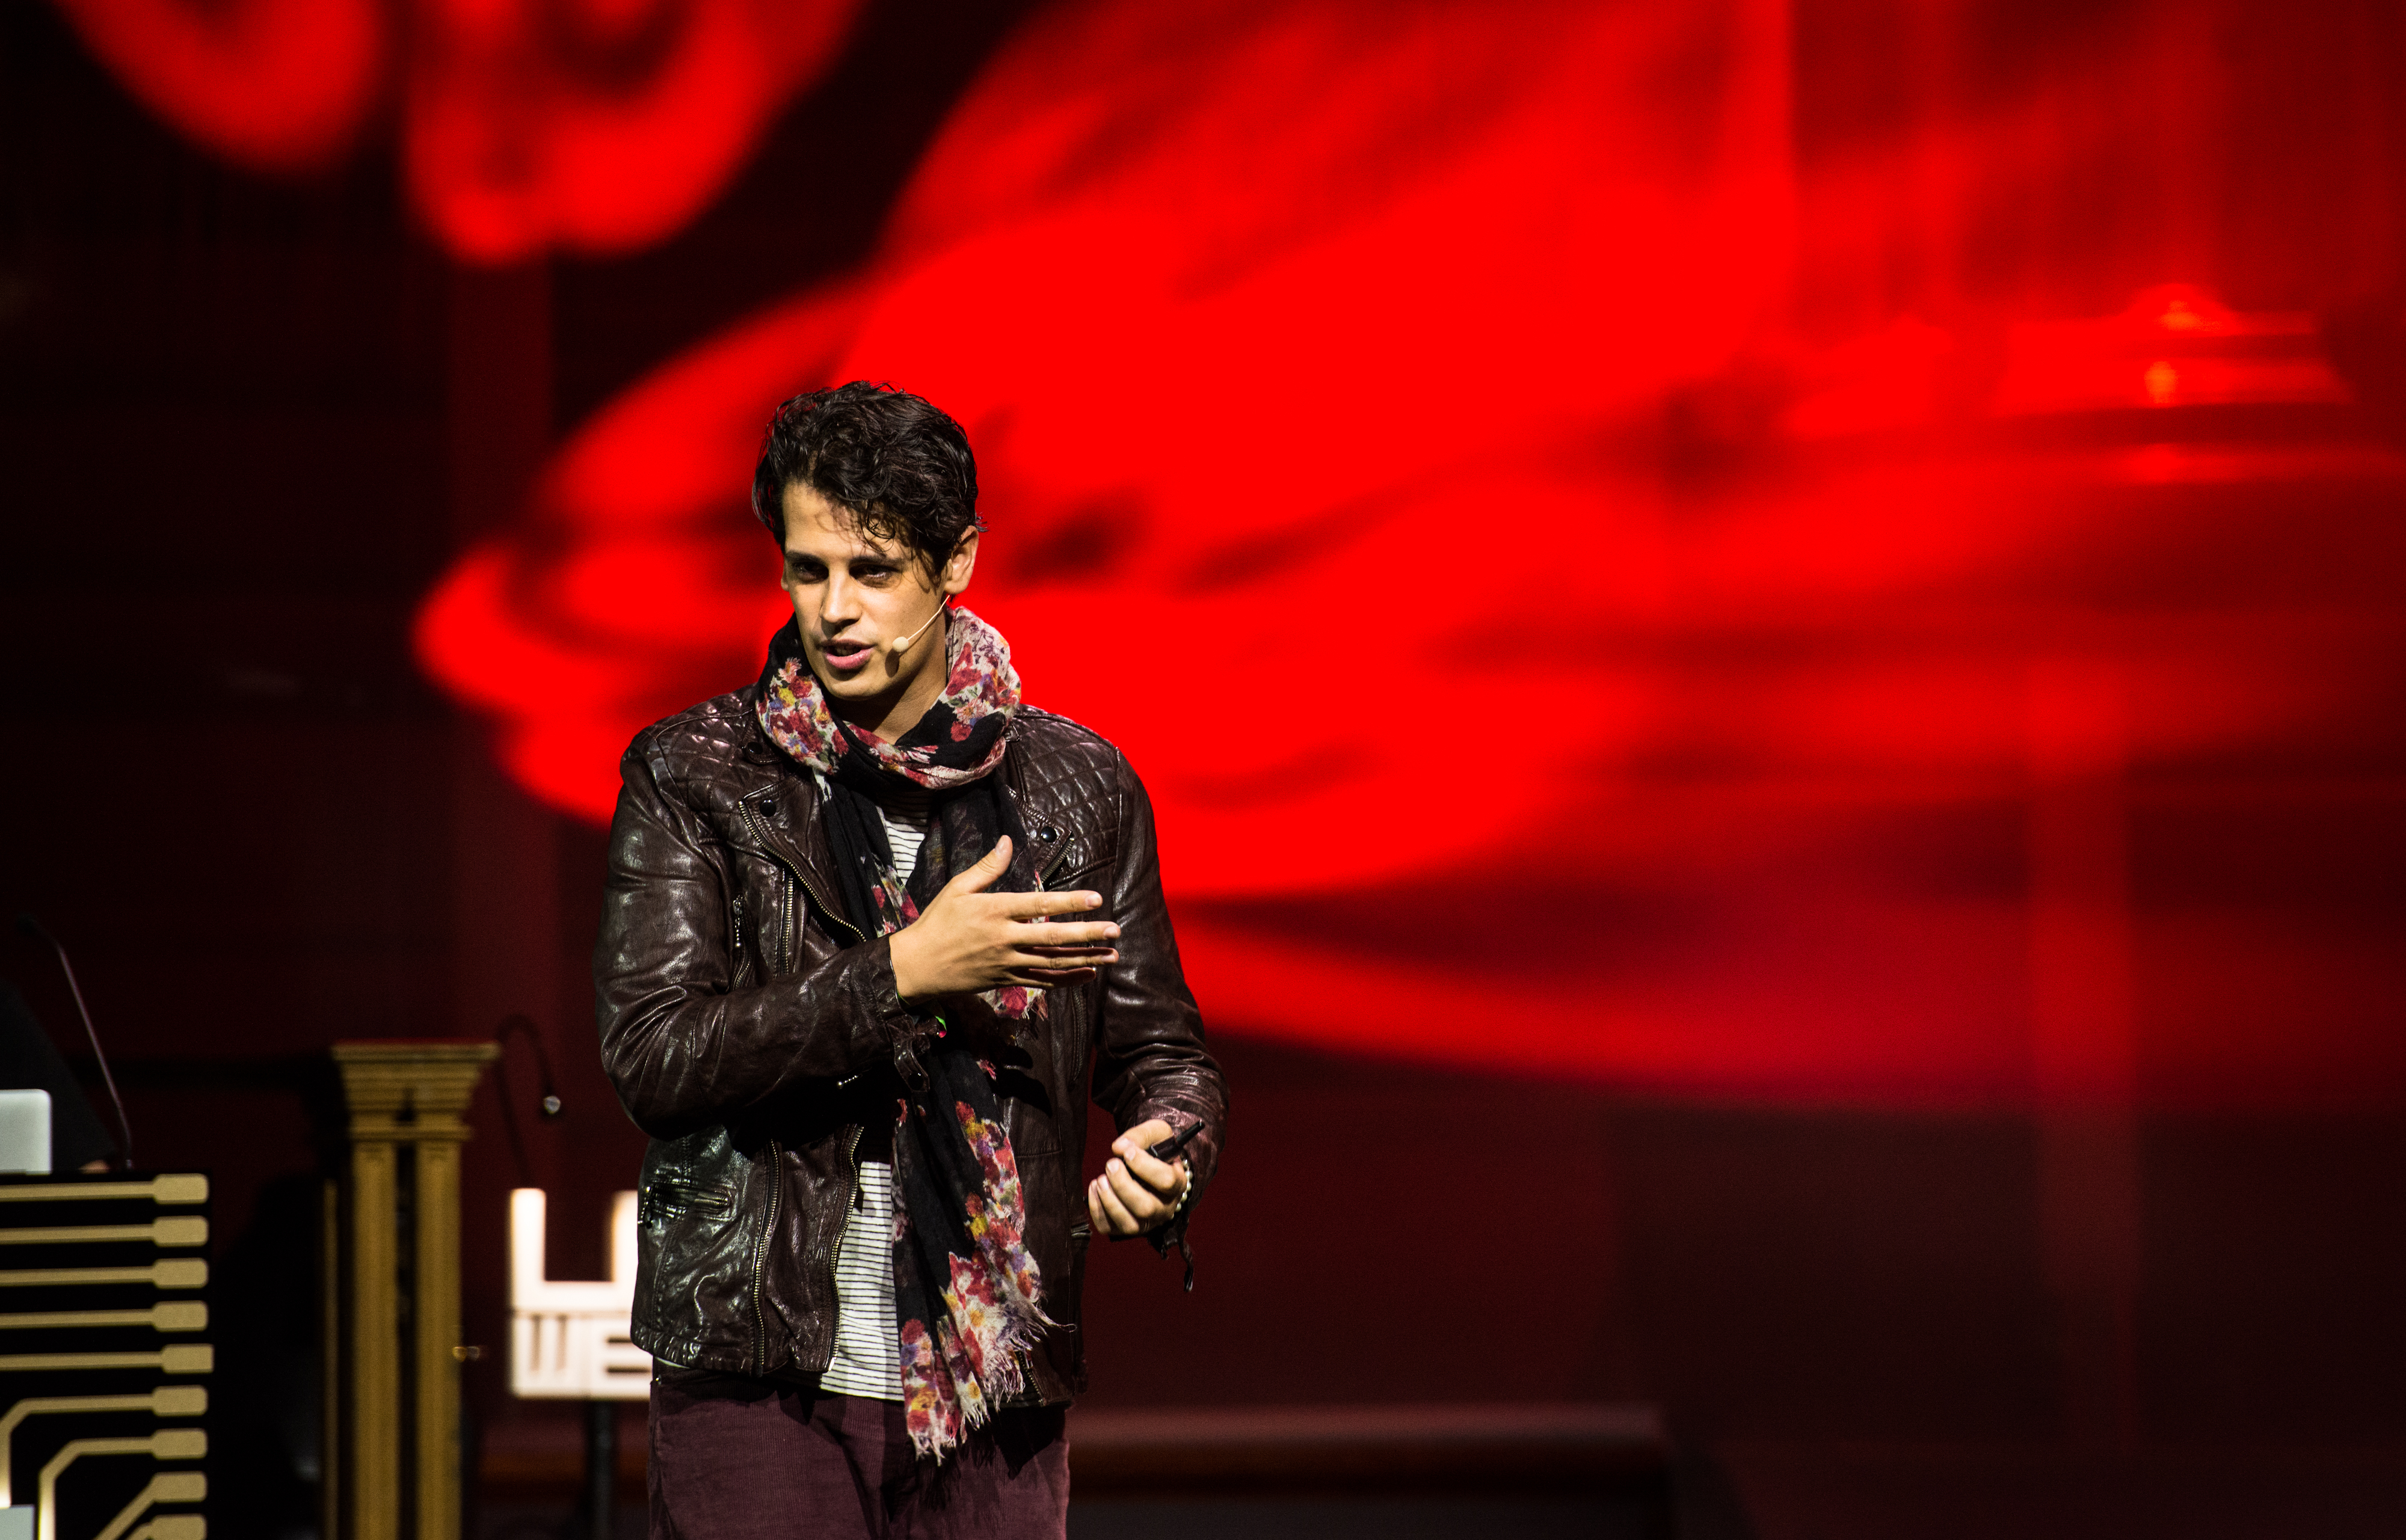 Milo_Yiannopoulos_Methodist_Central_Hall_Westminster_London_June_2013.jpg